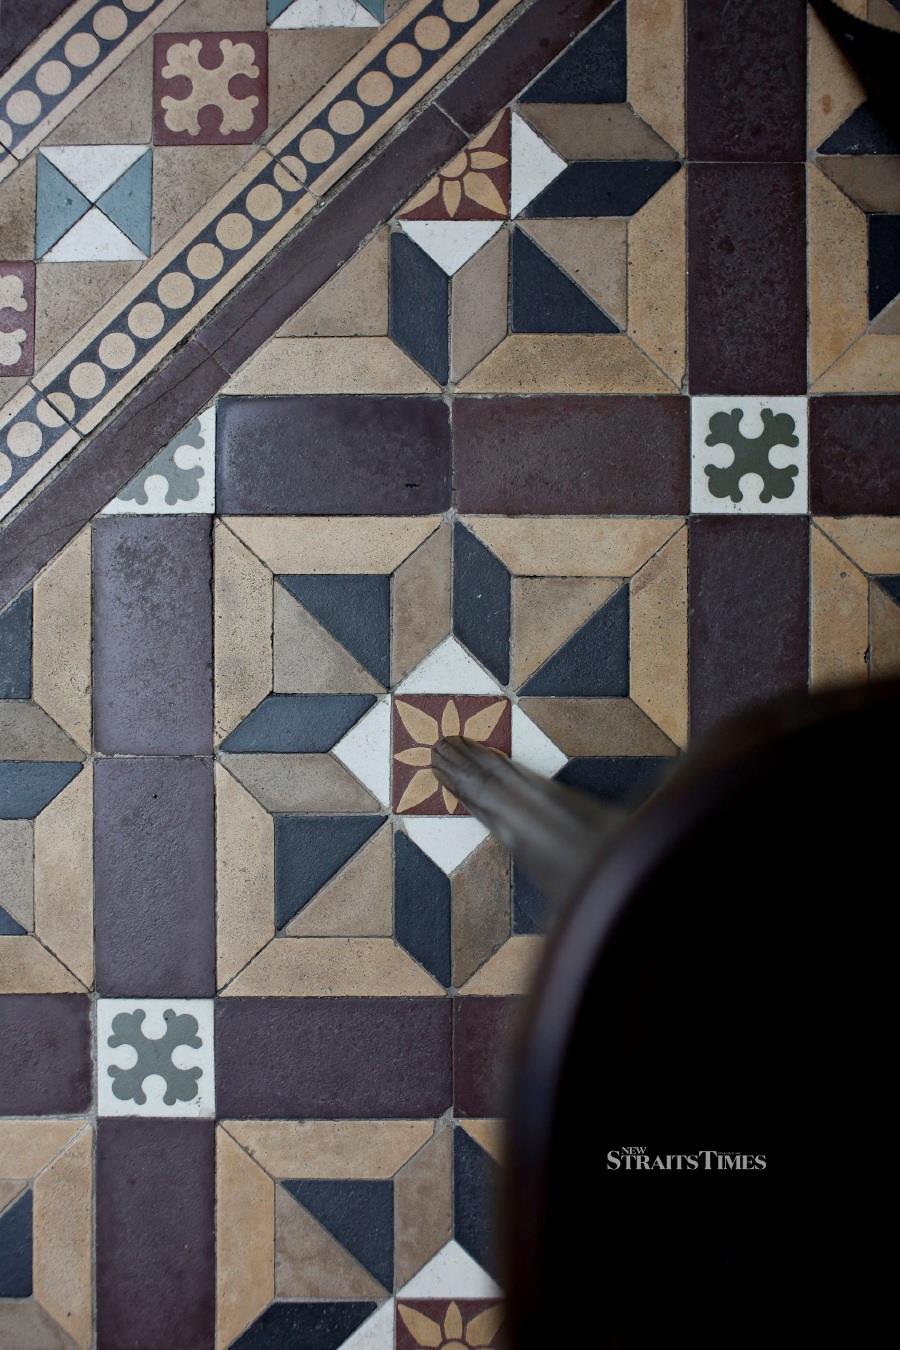  Decorative encaustic tiles imported from Stoke-on-Trent in Staffordshire, England.